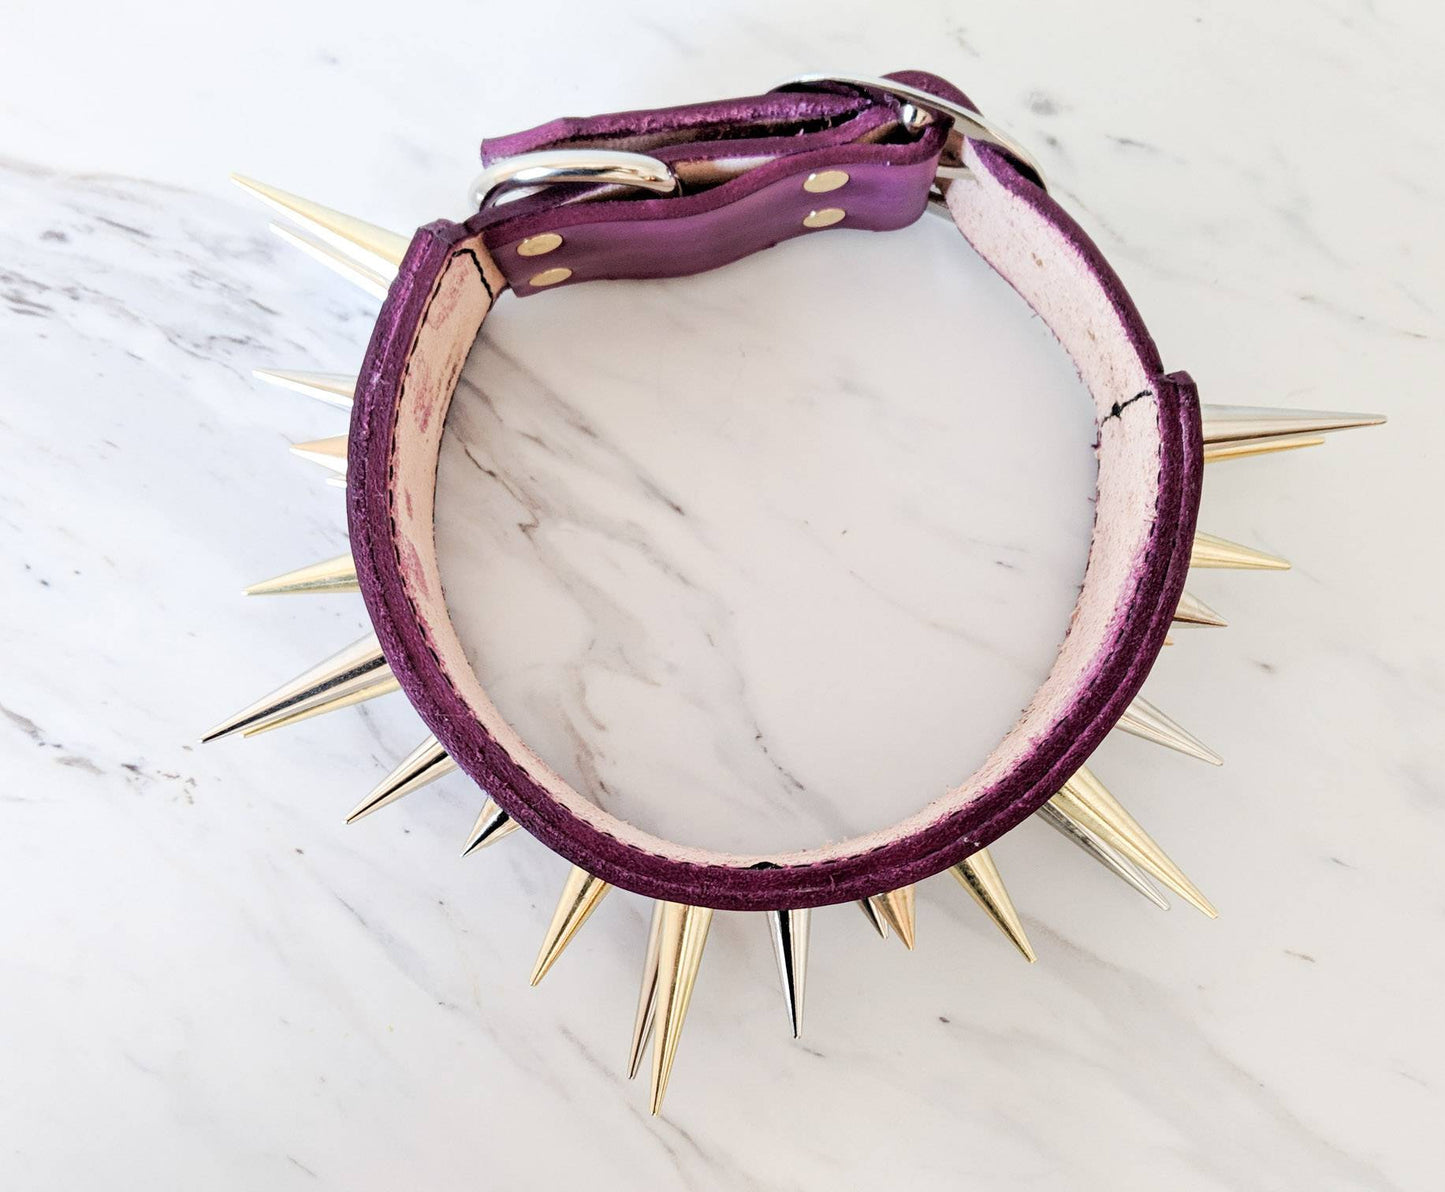 The Spike - Leather Dog Collar